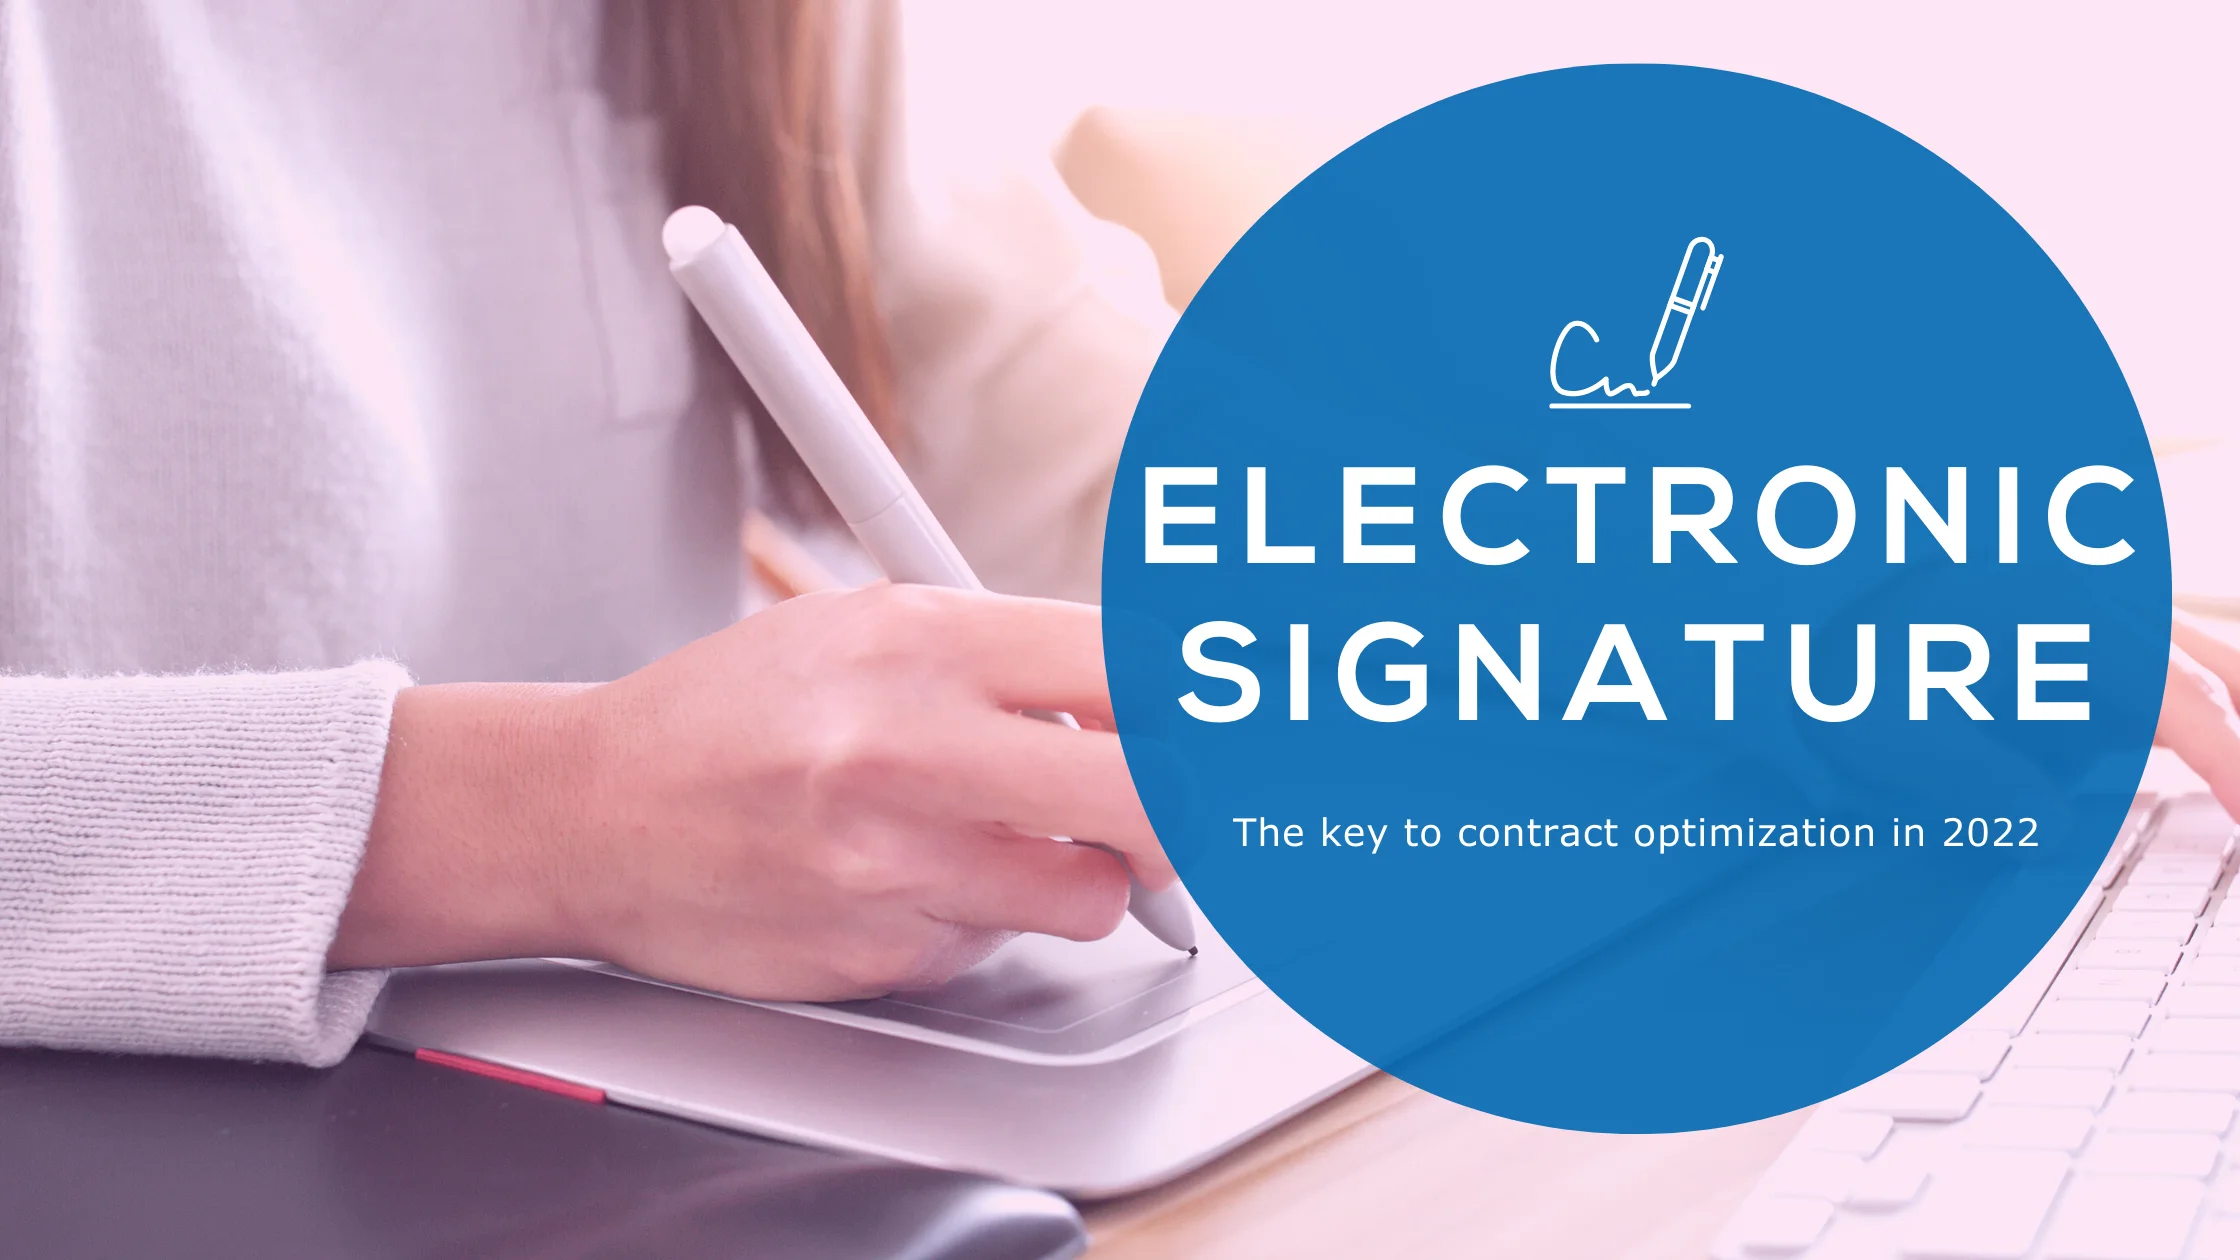 electronic signature, the key to contract optimization in 2022